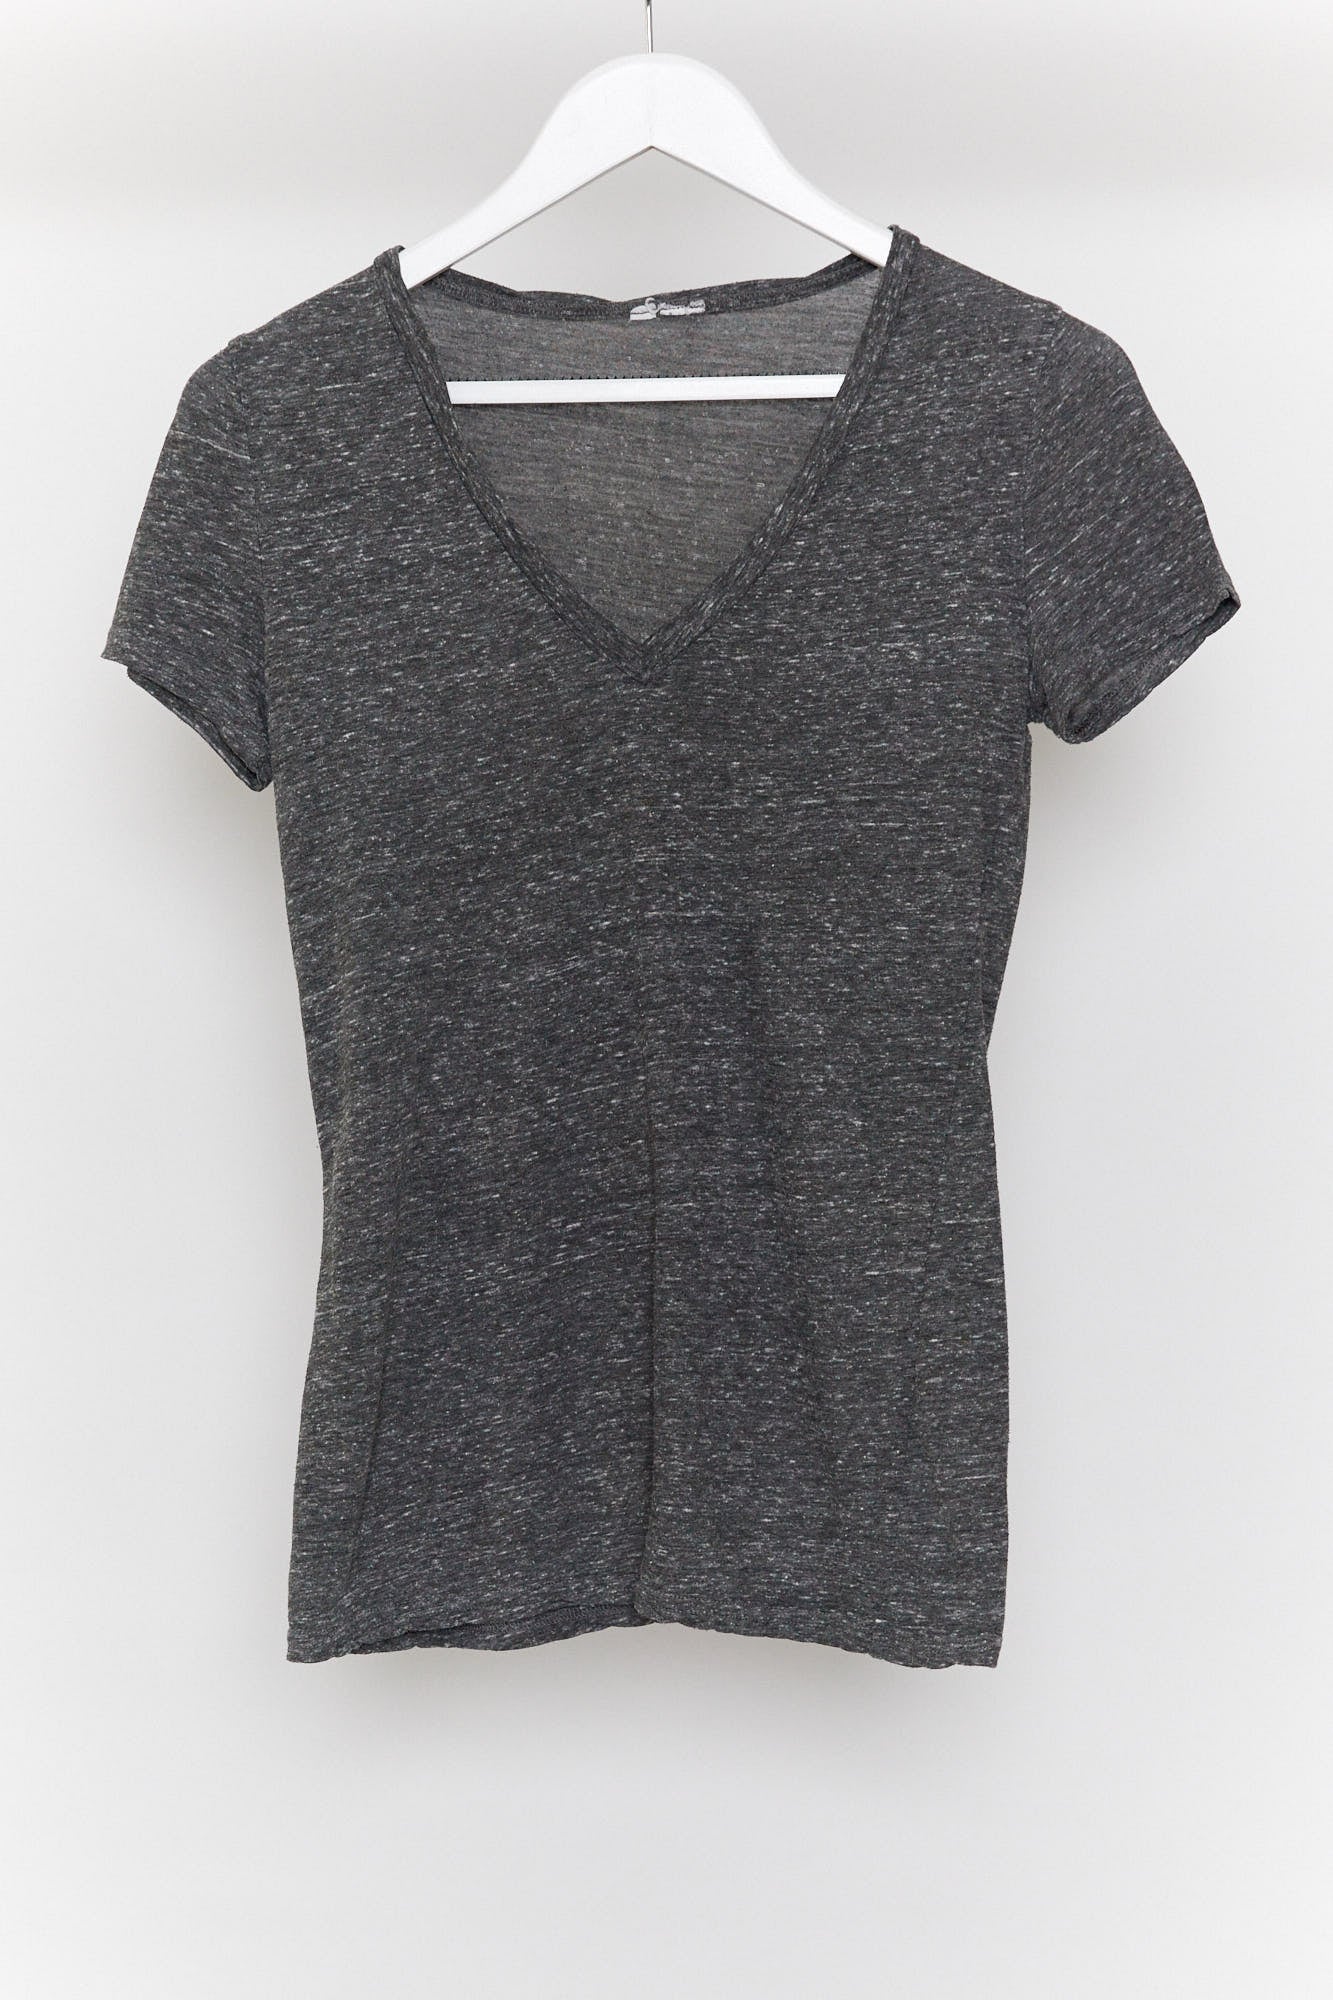 Womens Grey V-neck T-shirt size small